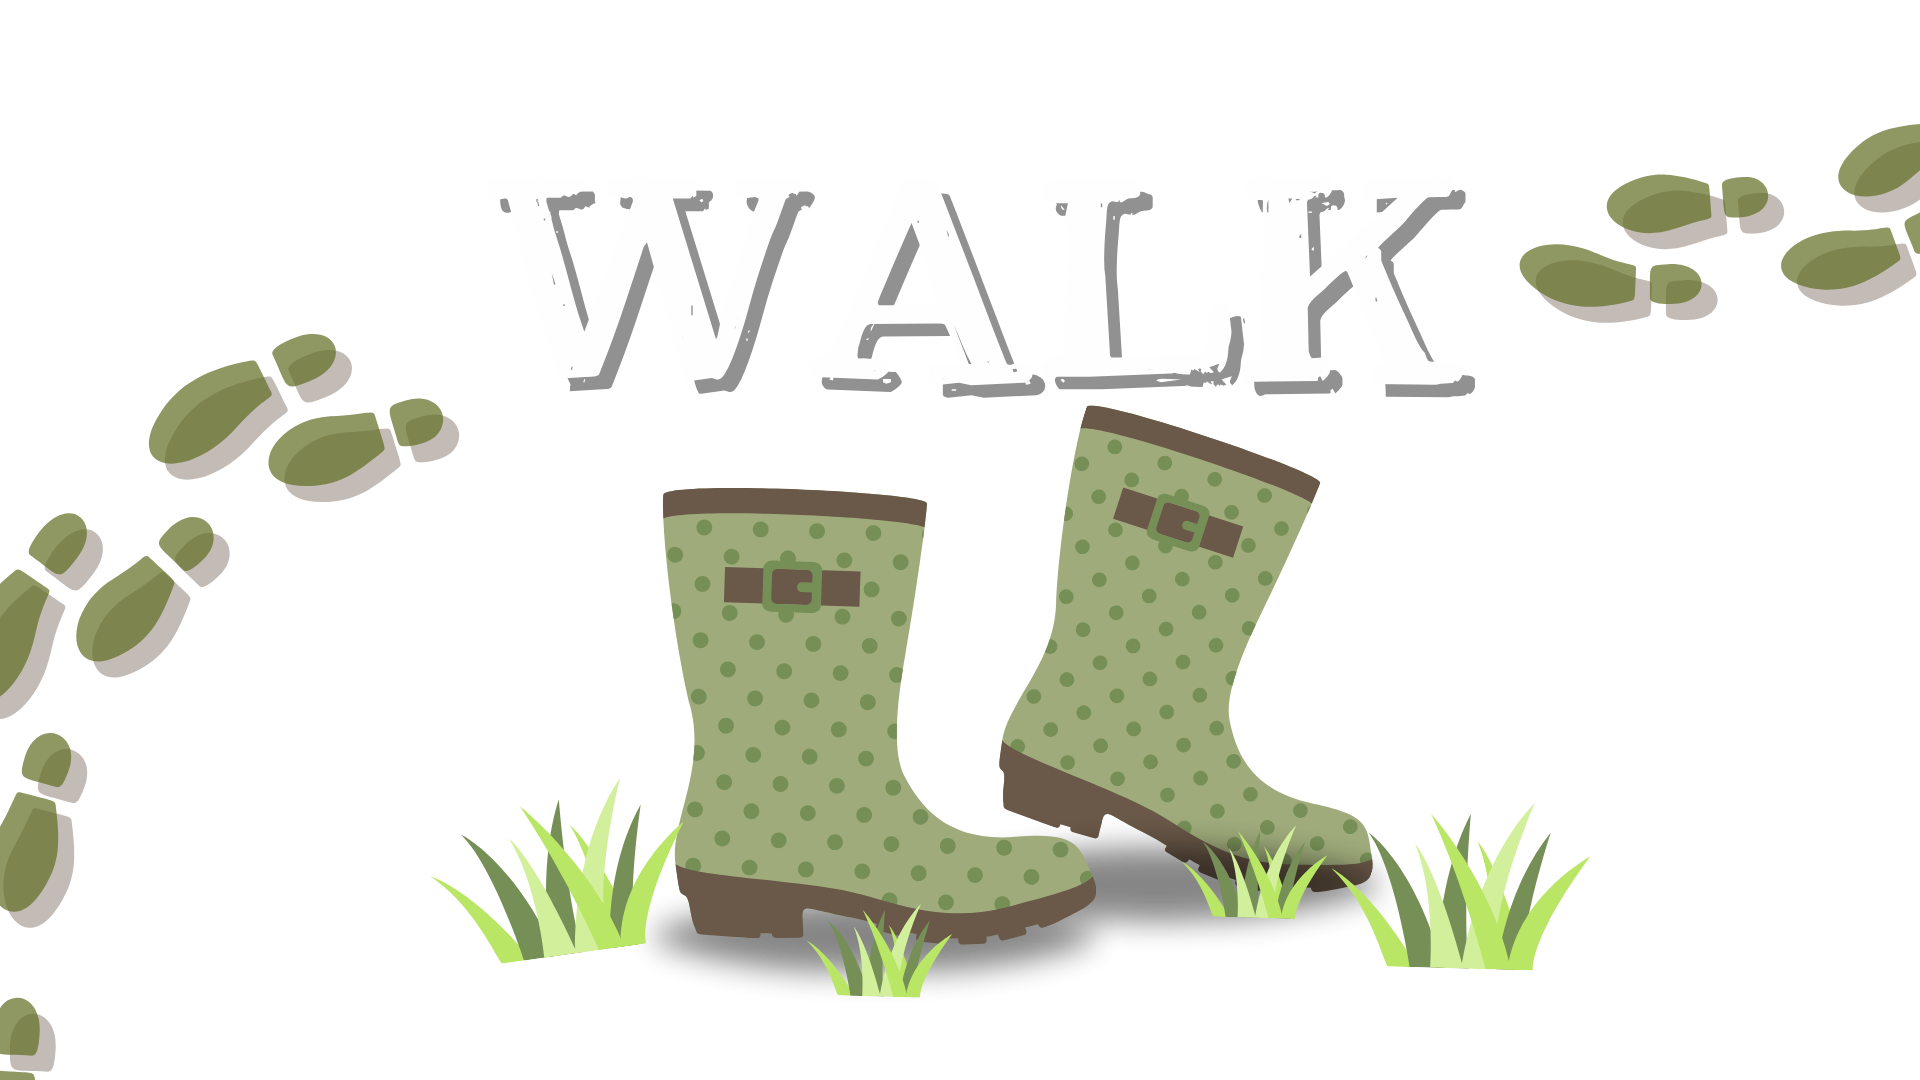 The Big Spring Trail Two green wellington boots with the text 'WALK' and footprints in mud